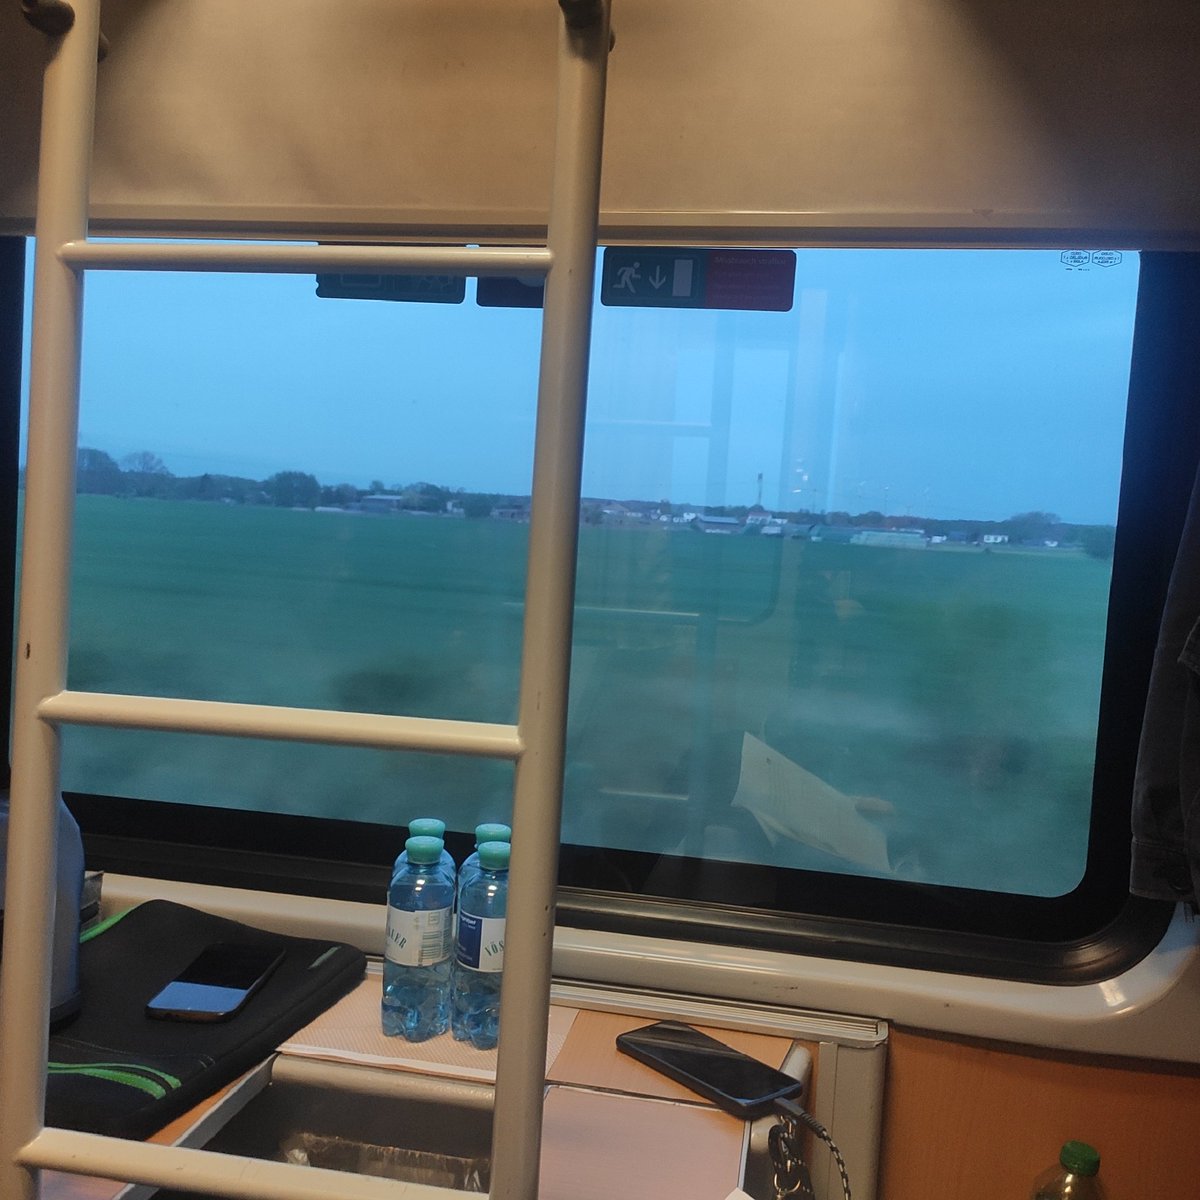 Heading to #EGU24 by #nighttrain from Berlin to Vienna . It is my first night train experience. So far so good! Hope to see friends and colleagues soon #traintoEGU